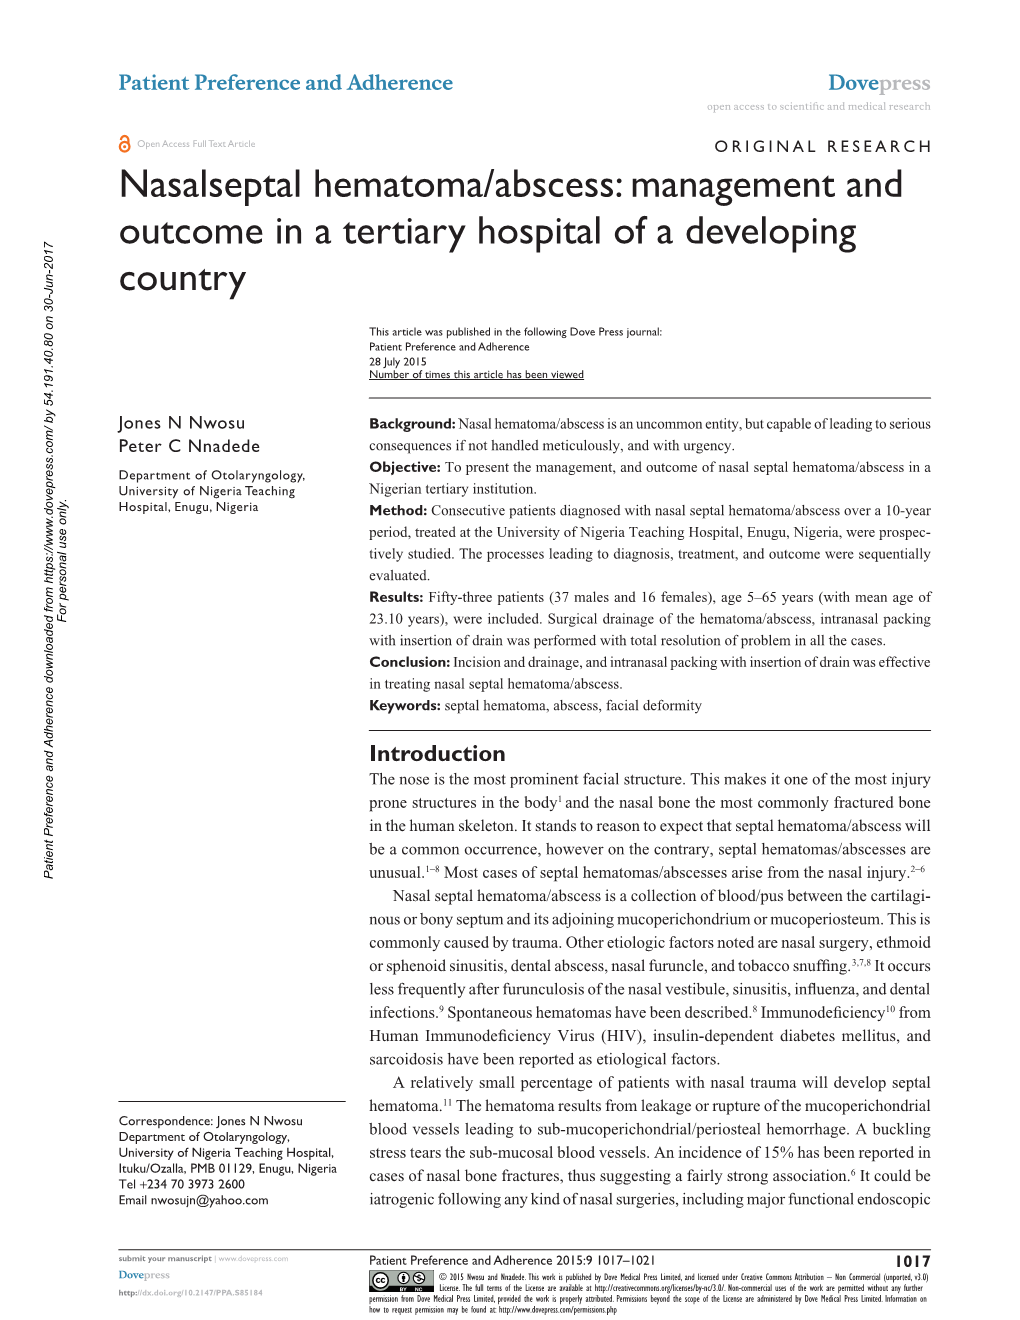 Nasalseptal Hematoma/Abscess: Management and Outcome in a Tertiary Hospital of a Developing Country